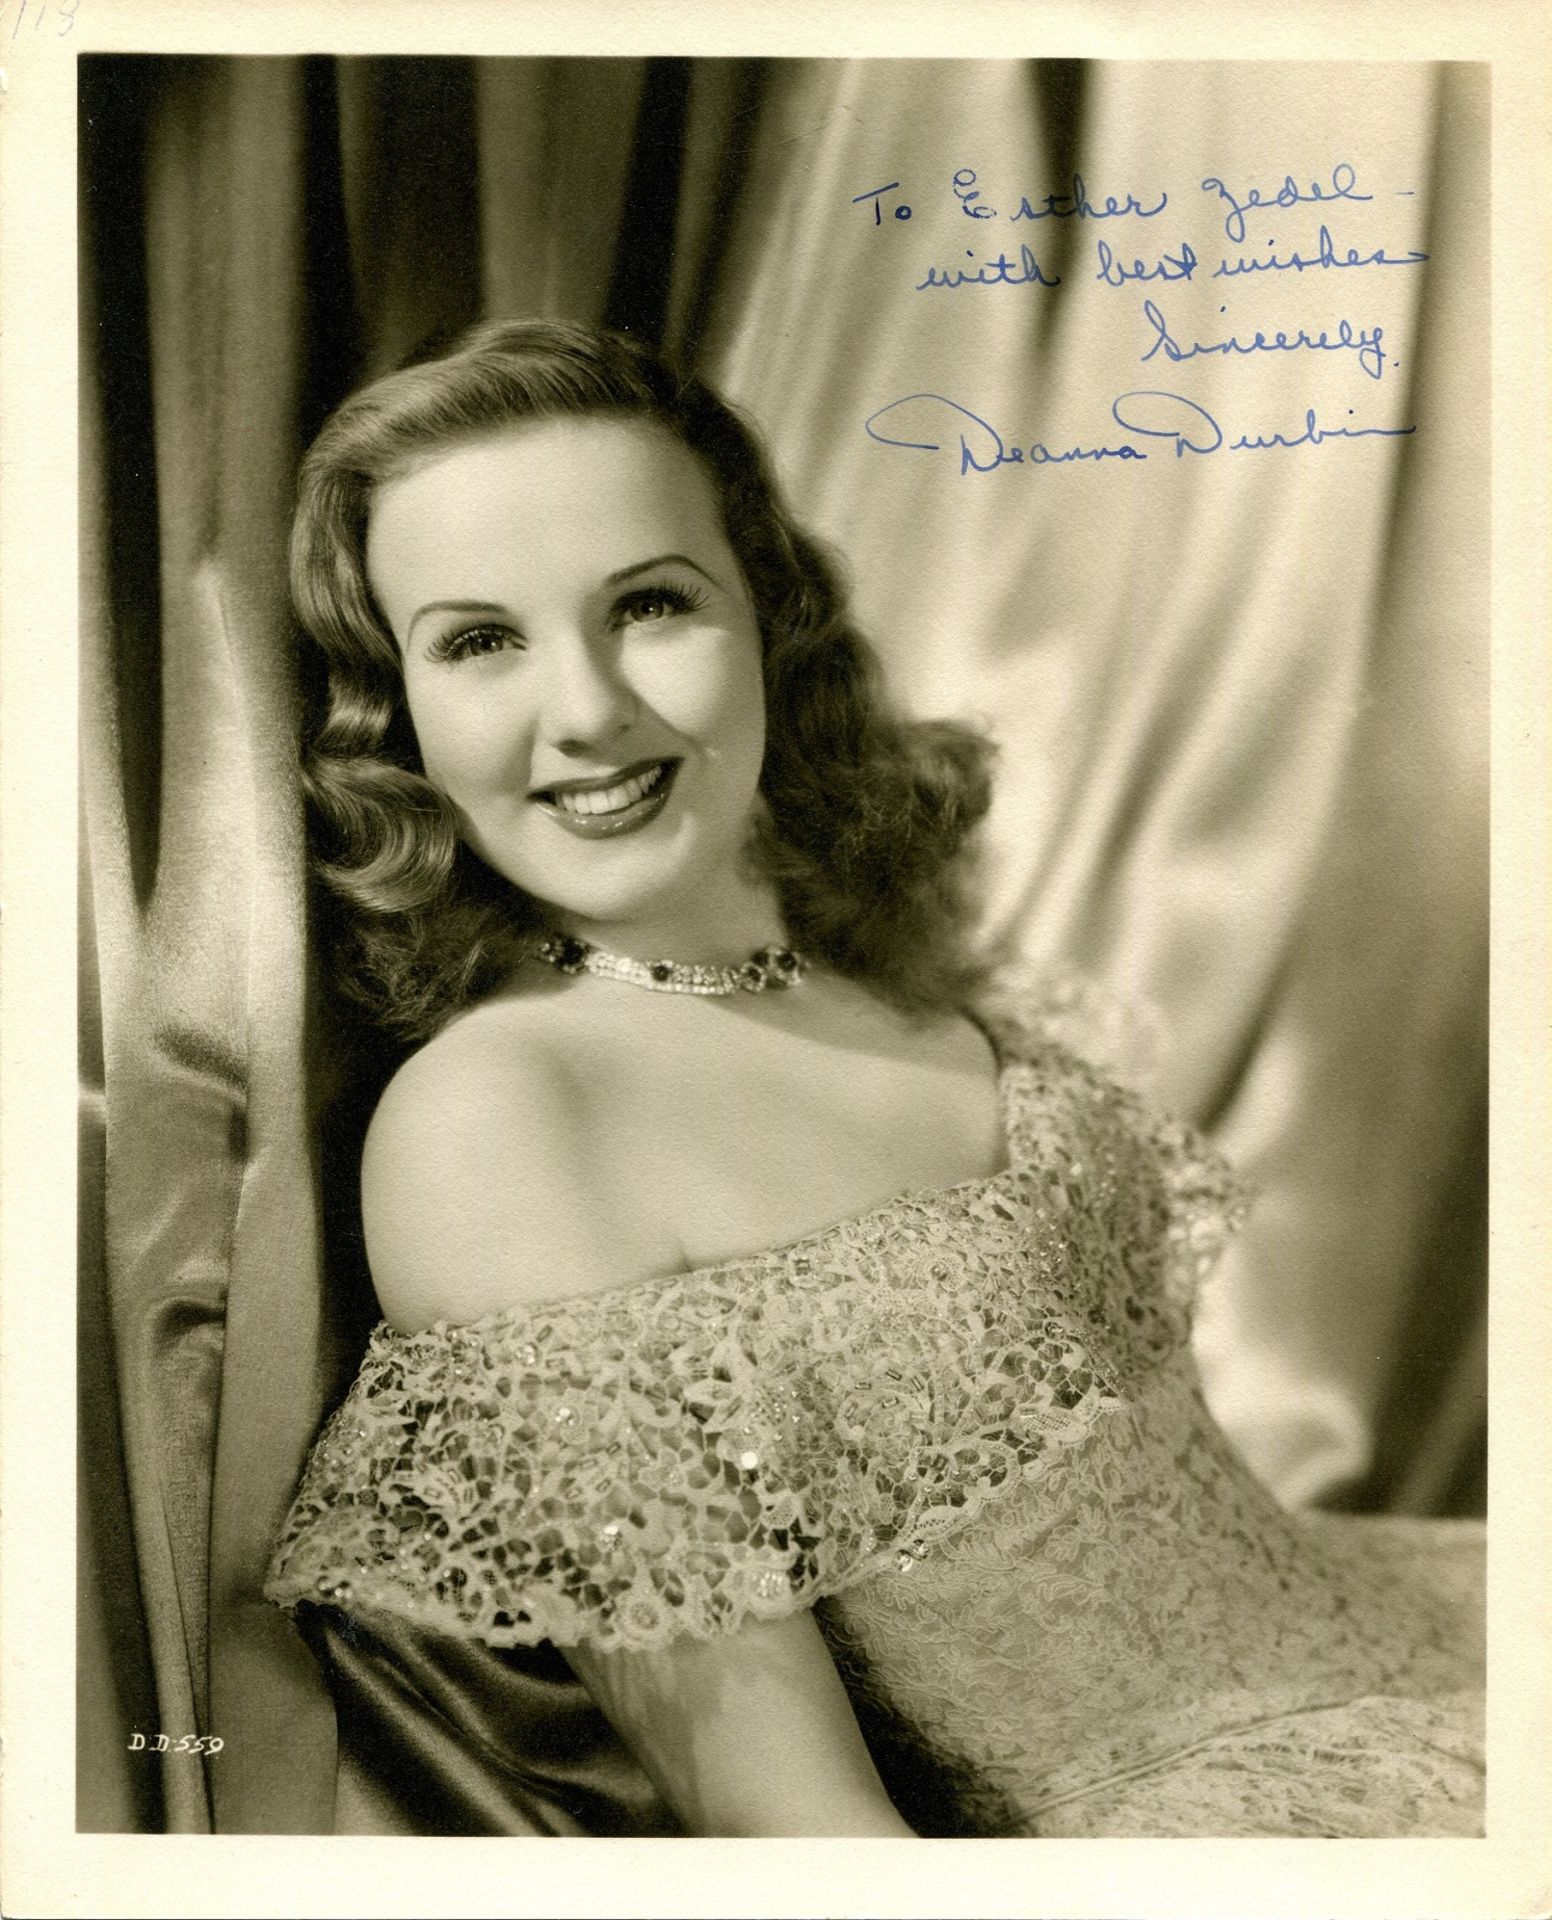 DURBIN DEANNA: (1921-2013) Canadian actress and singer, the recipient of the Academy Juvenile